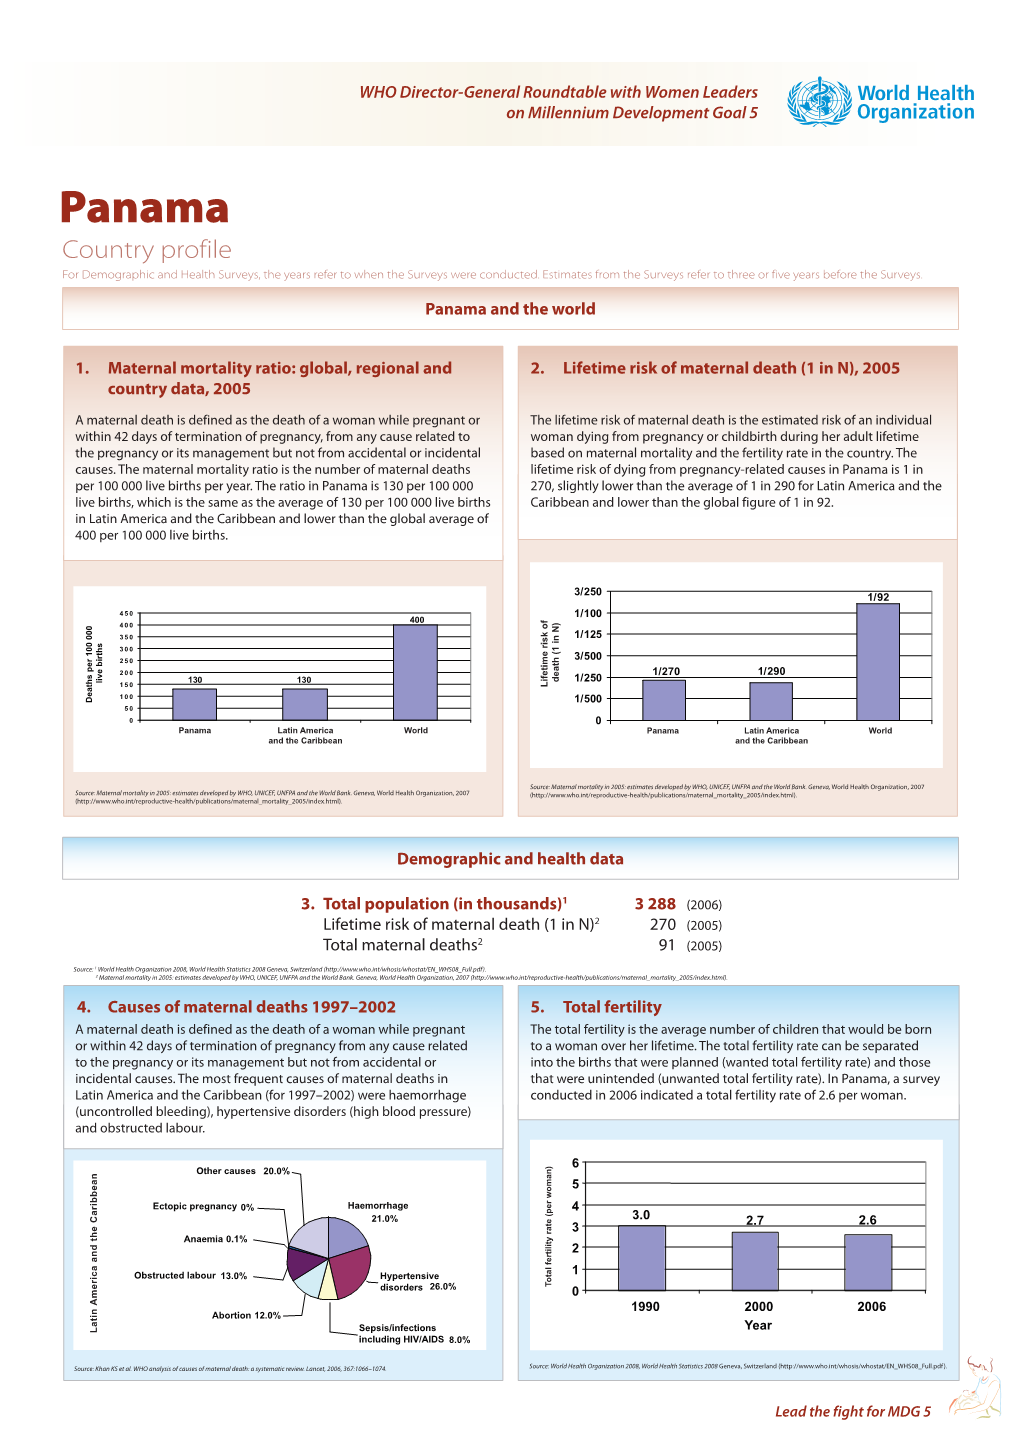 Panama Country Profile for Demographic and Health Surveys, the Years Refer to When the Surveys Were Conducted